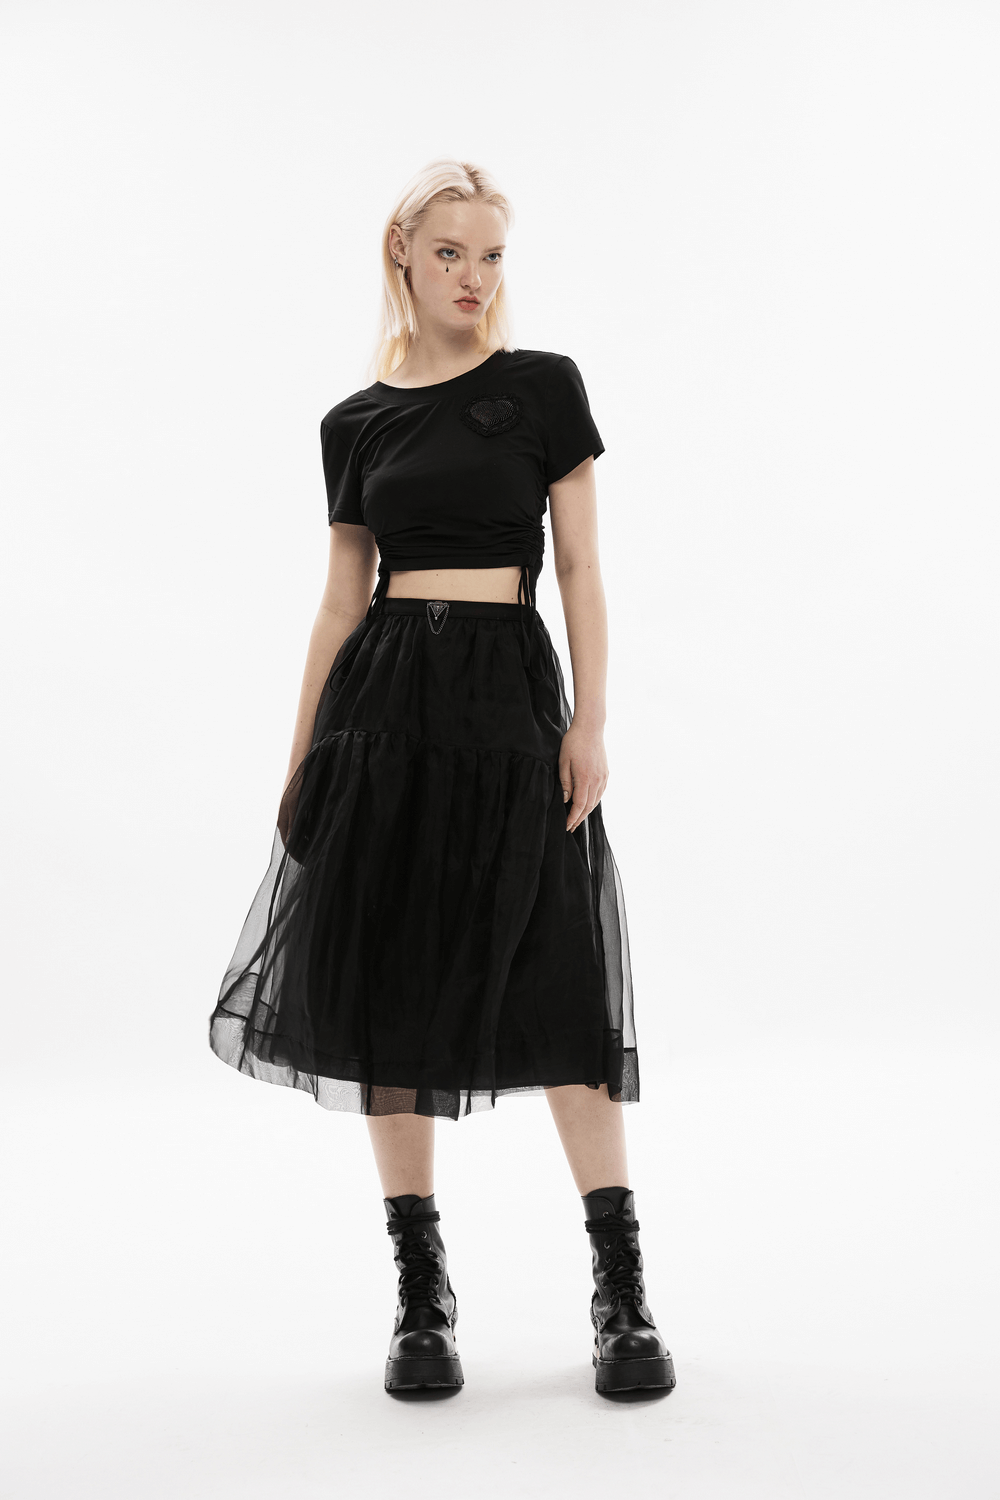 Black Gothic Skirt-Dress 2 in 1 with Removable Straps